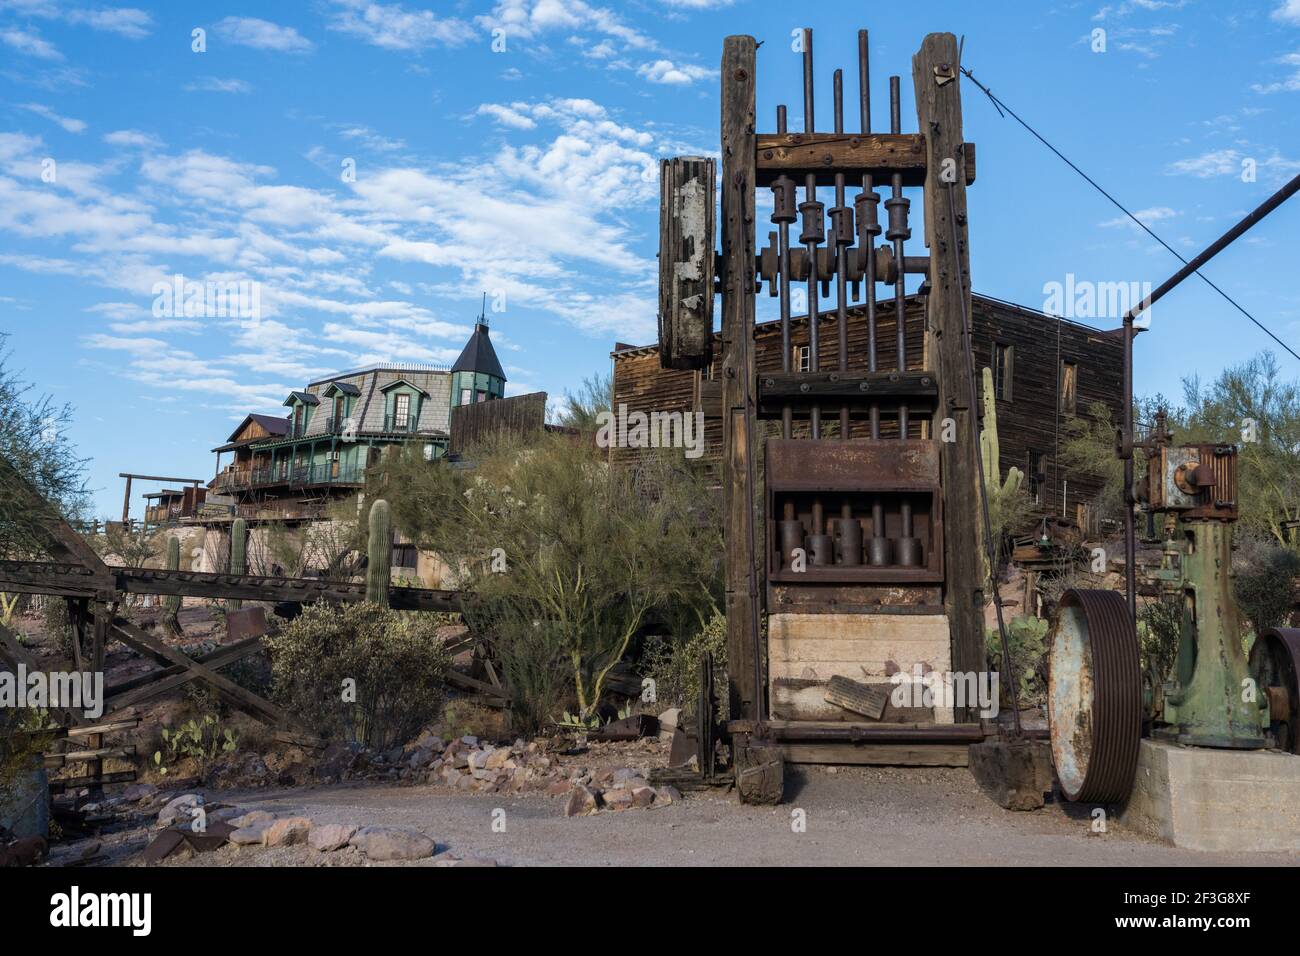 An authentic five-stamp mill for crushing ore from the 1800's in the old mining ghost town of Goldfield, Arizona. Stock Photo